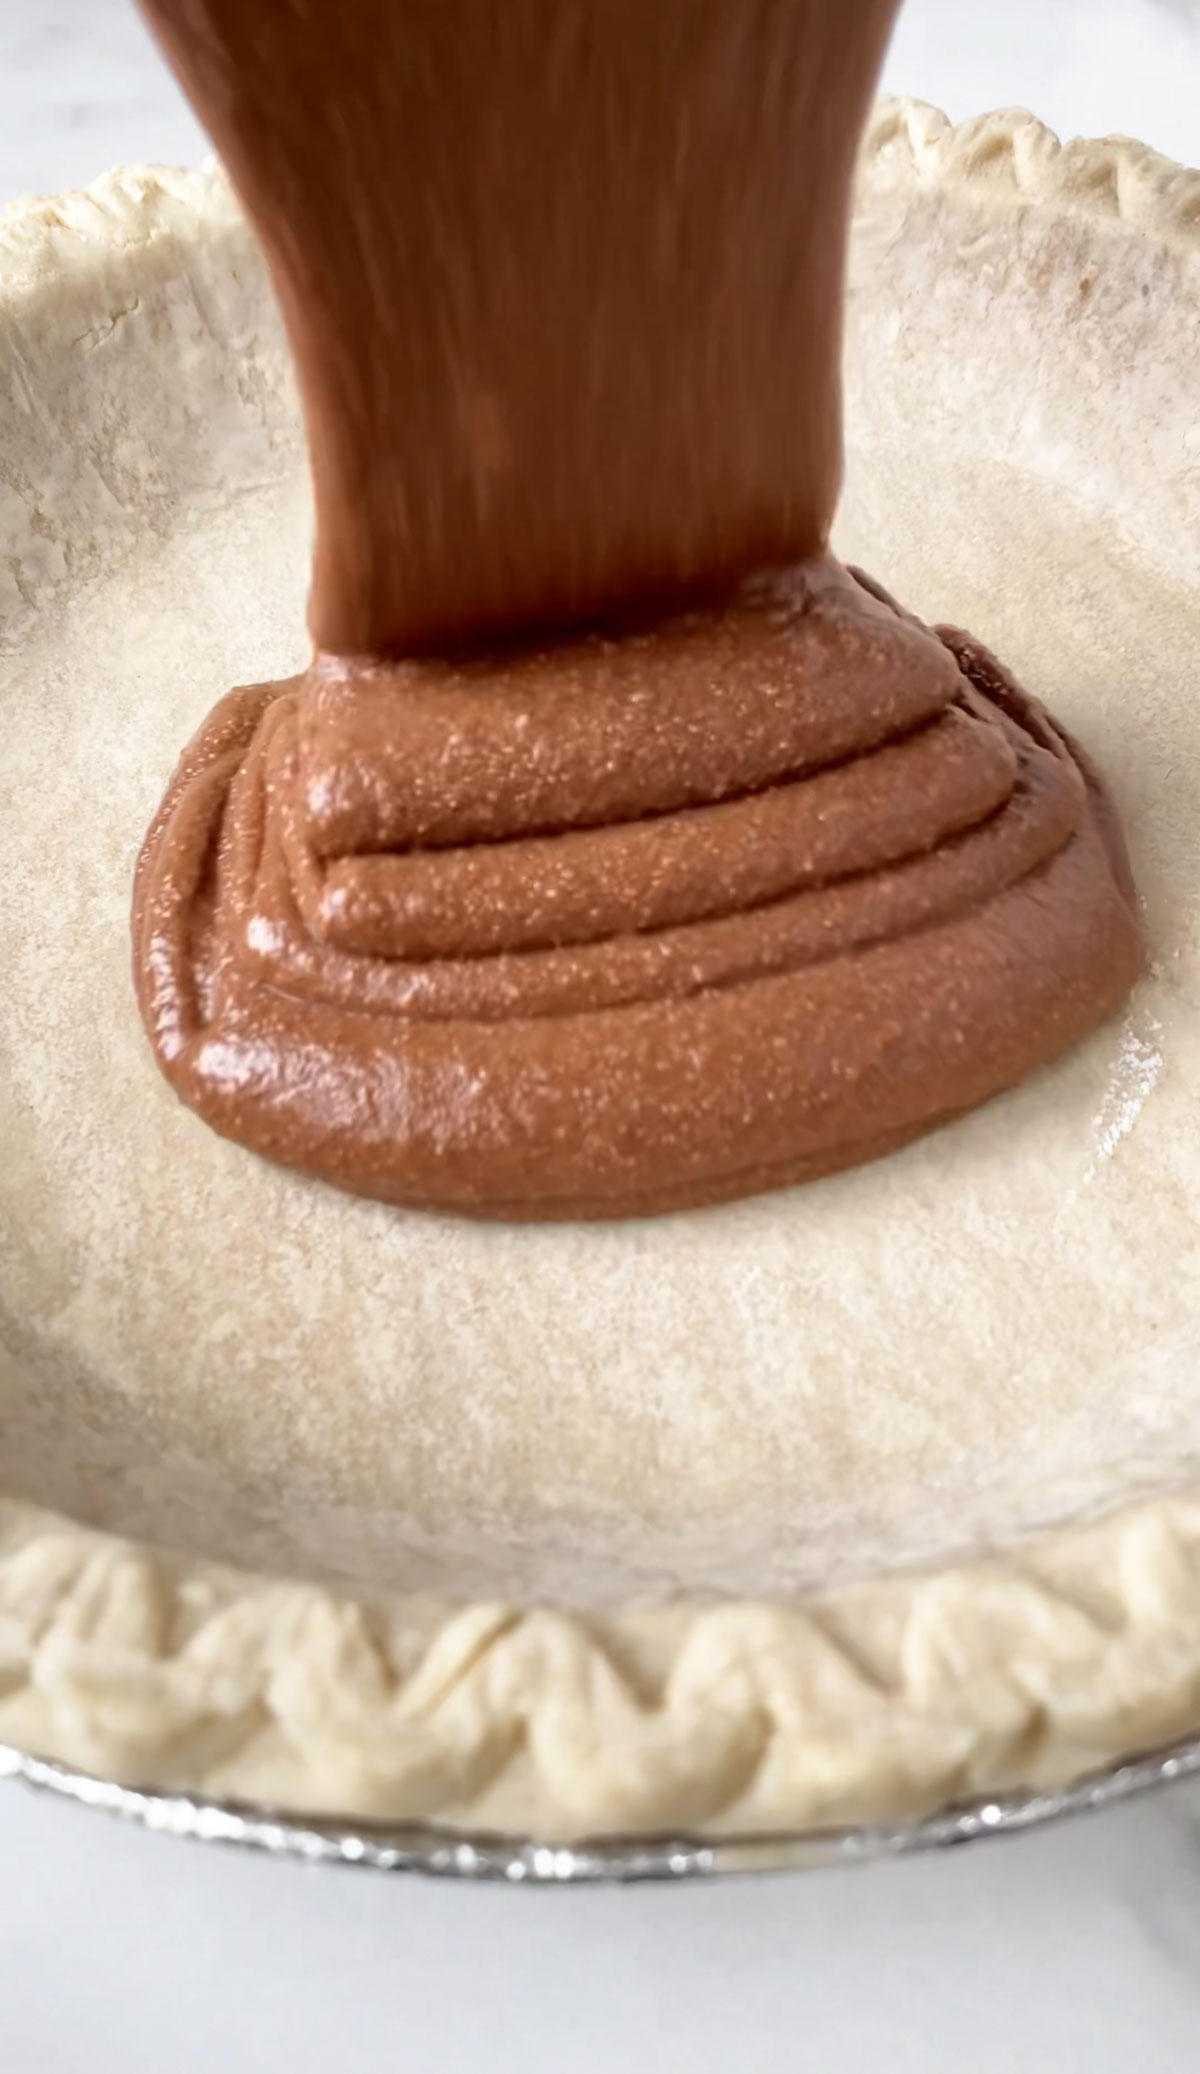 Pouring the vegan chocolate mixture into a pie shell.